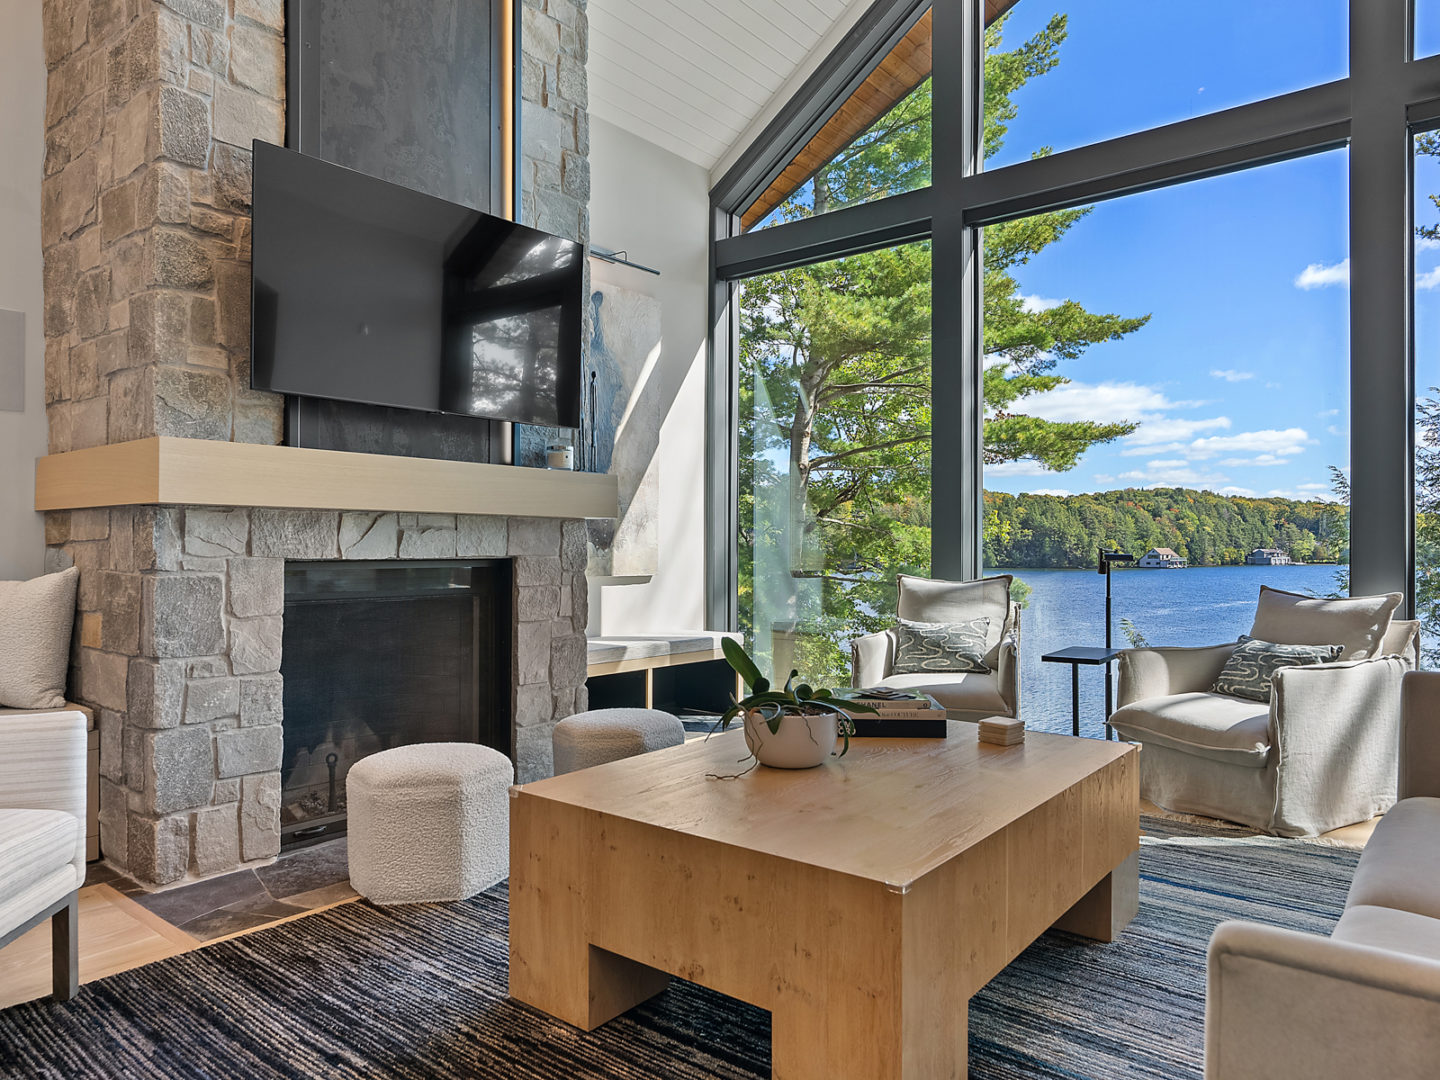 Family room overlooking the lake